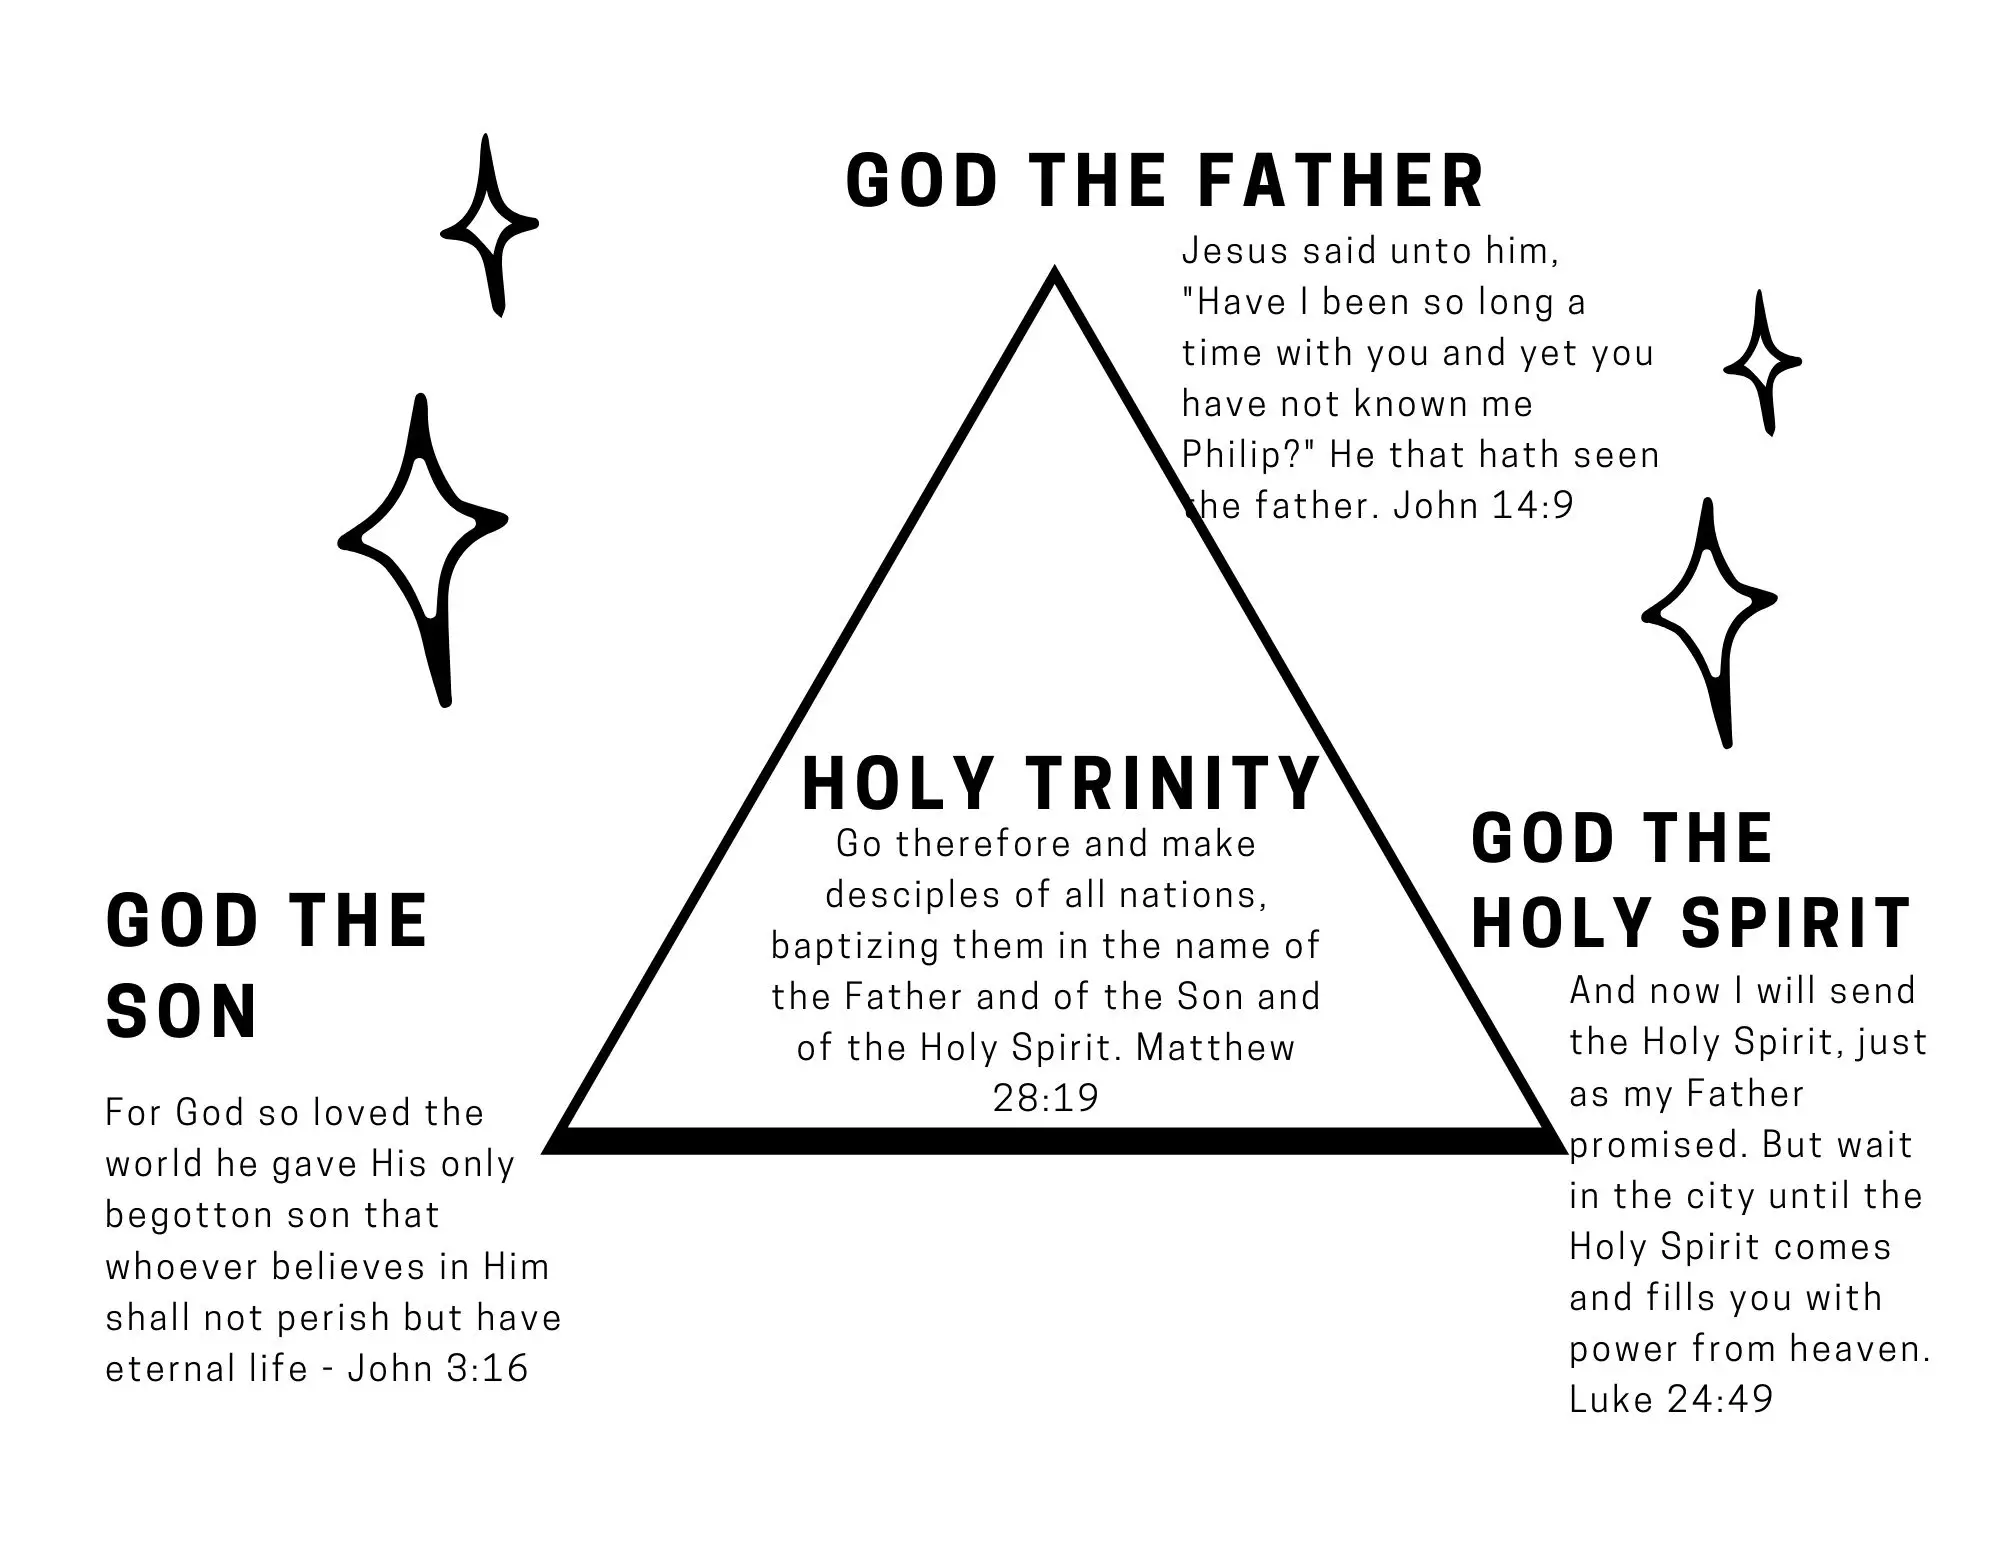 reflection/journal writing how can i show the trinity to others